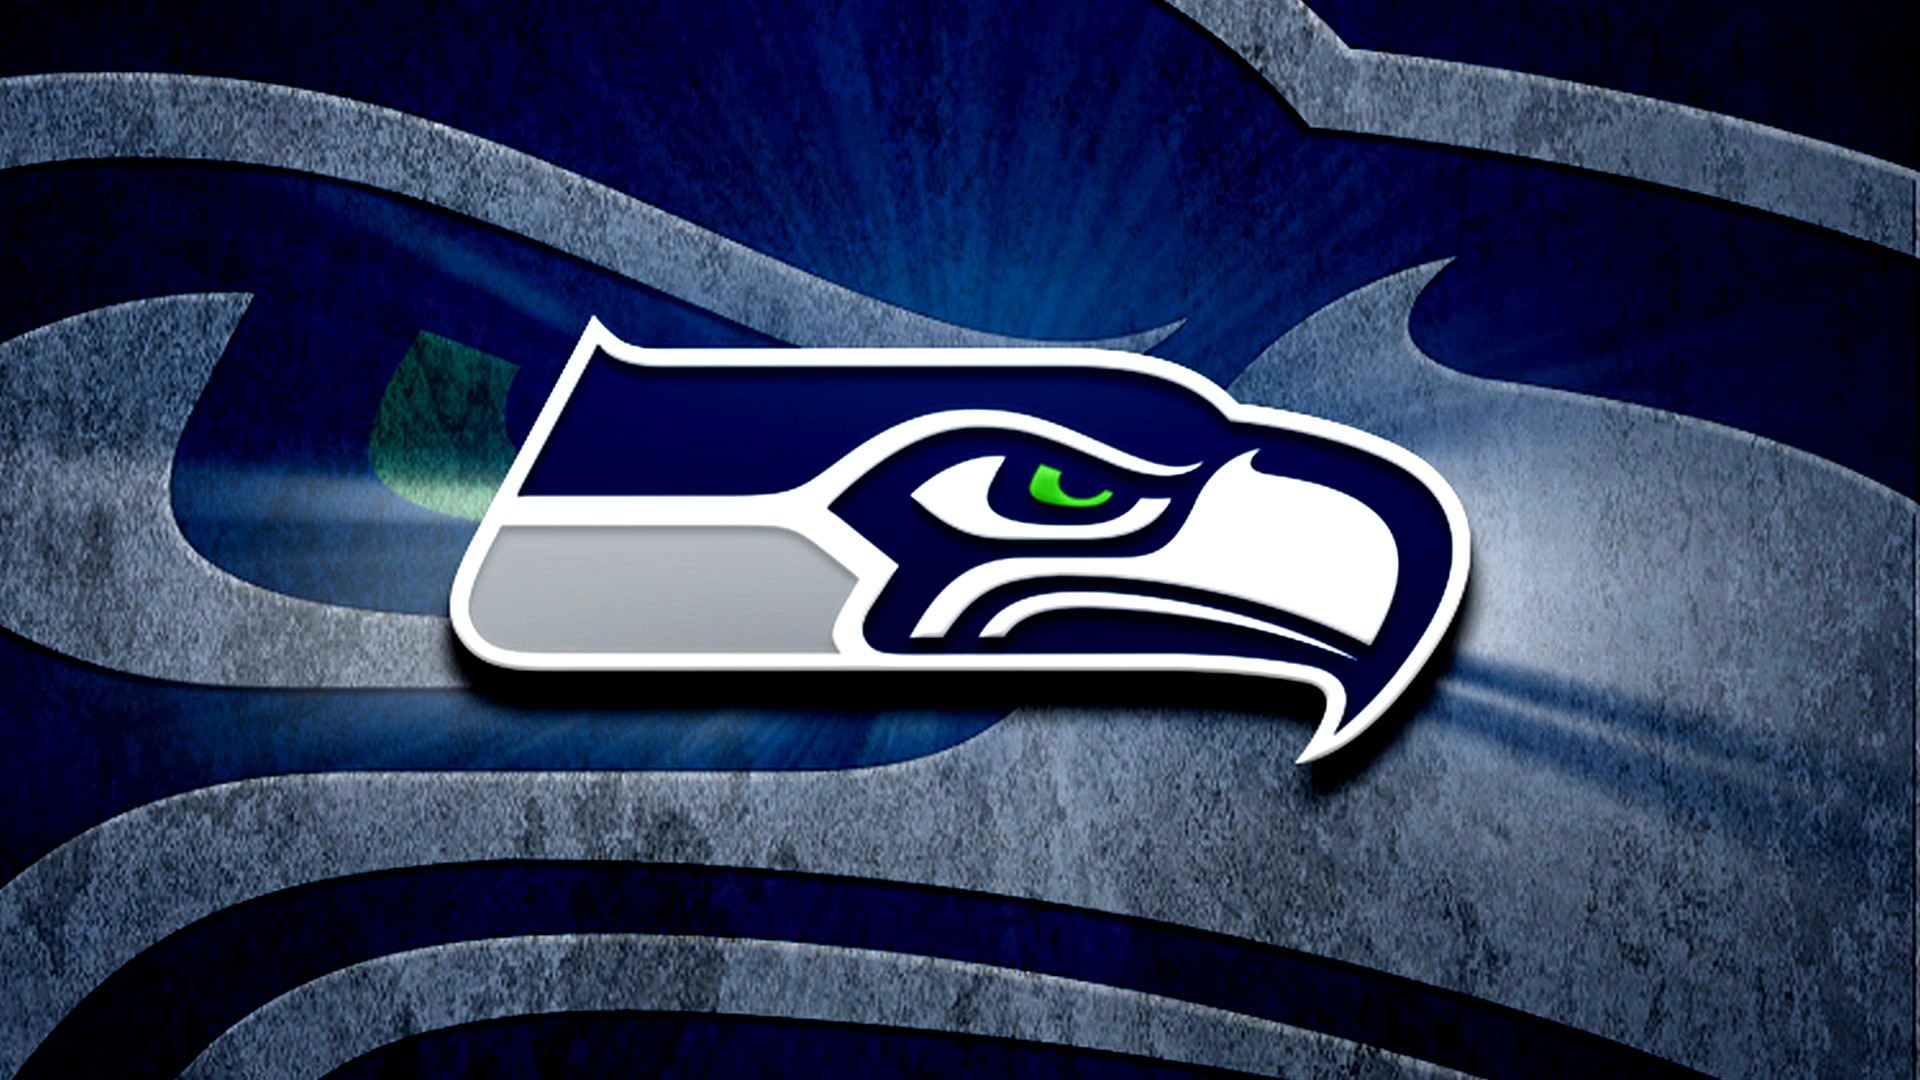 Wallpapers HD Seattle Seahawks NFL With high-resolution 1920X1080 pixel. You can use this wallpaper for your Mac or Windows Desktop Background, iPhone, Android or Tablet and another Smartphone device